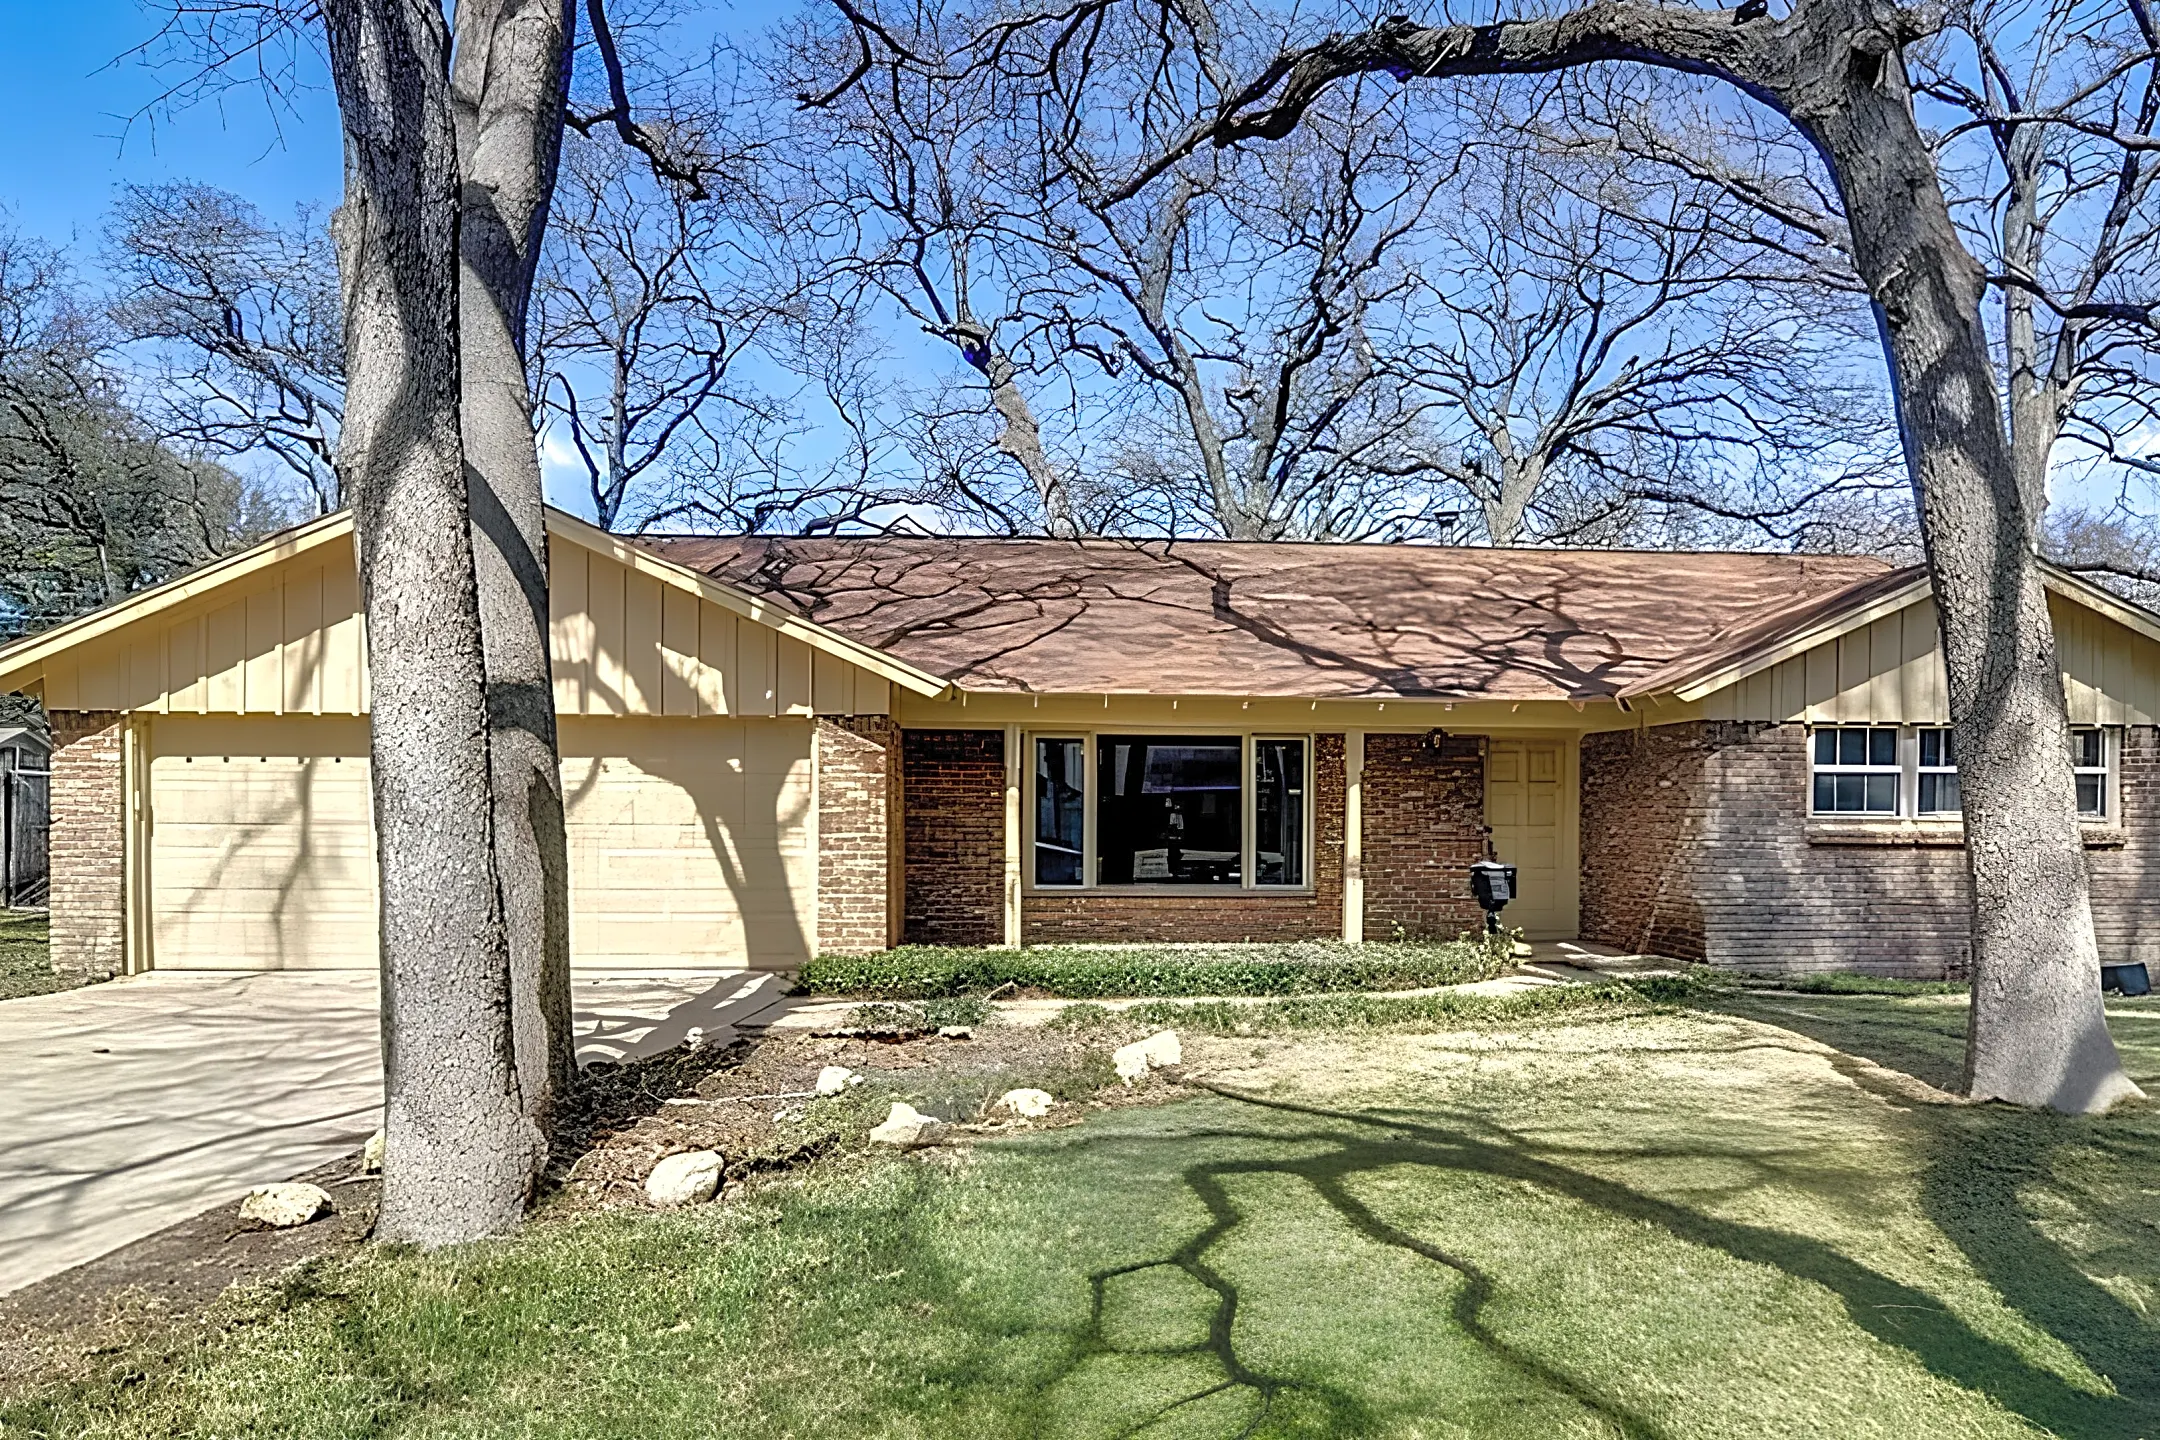 Building - Room For Rent - Fort Worth, TX